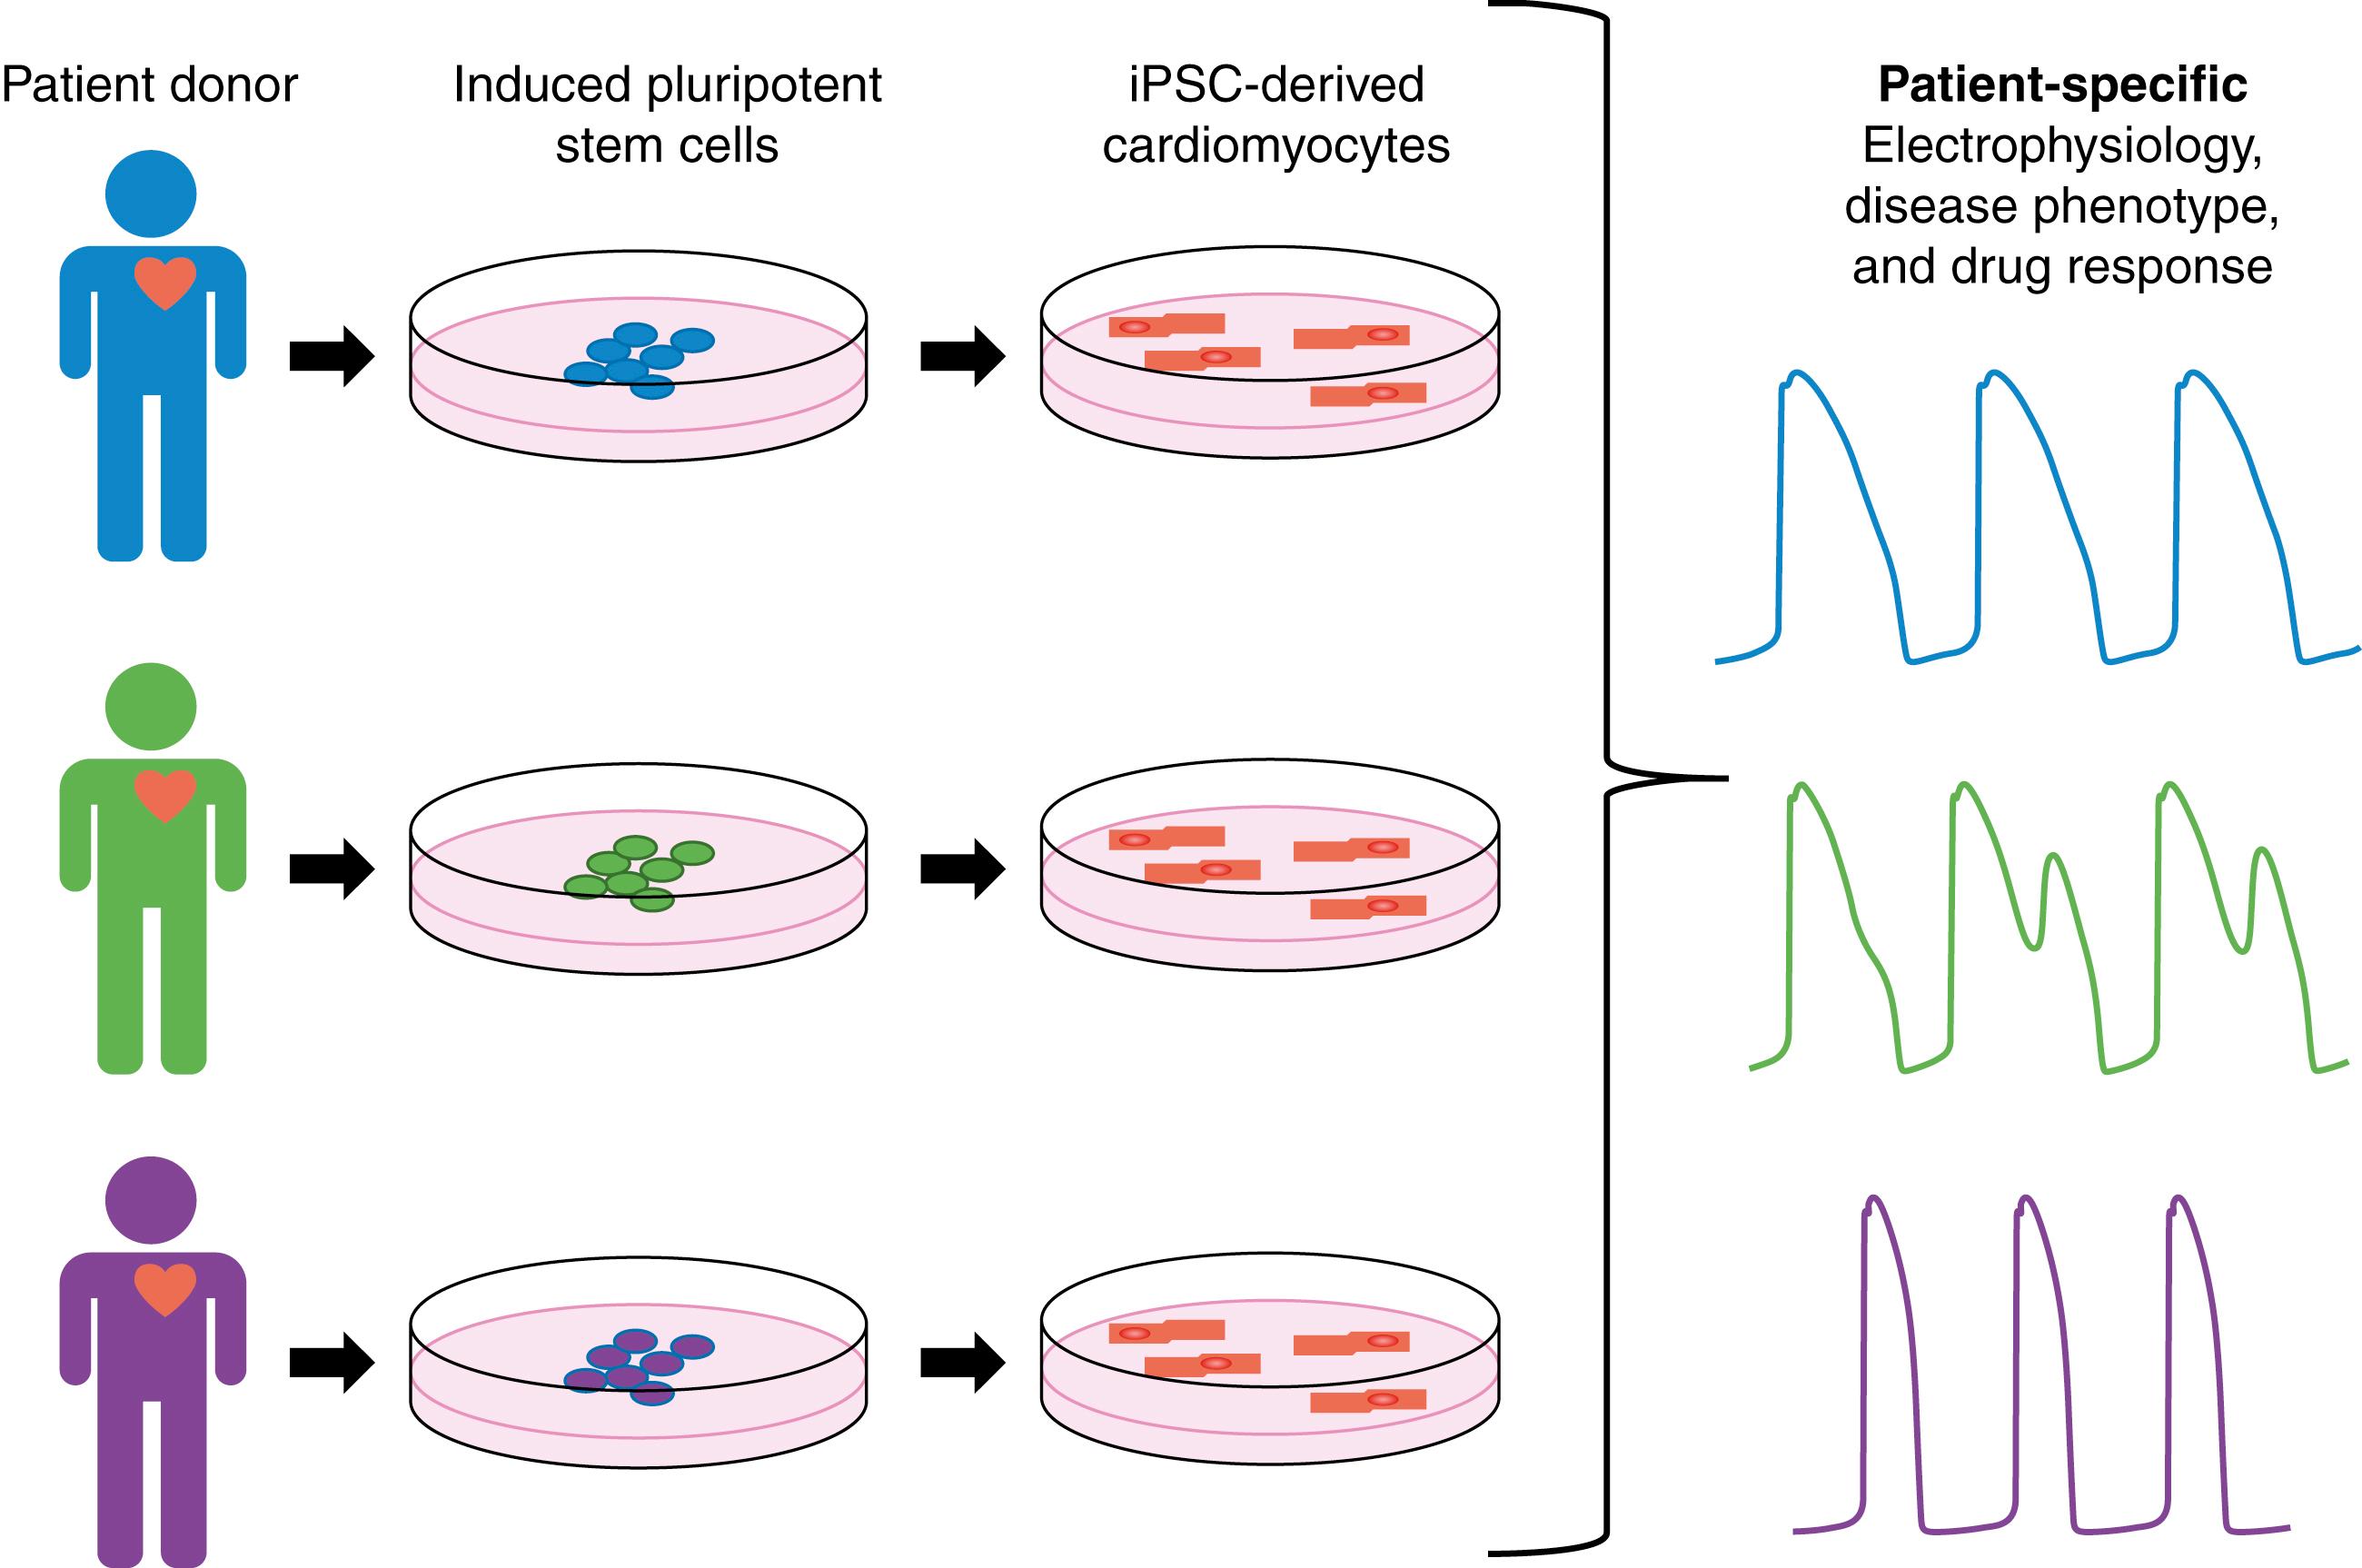 Fig. 9.1, Development of patient-specific embryonic-like pluripotent stem cell (iPSC)-derived cardiomyocytes resulting in patient-specific electrophysiology markers.